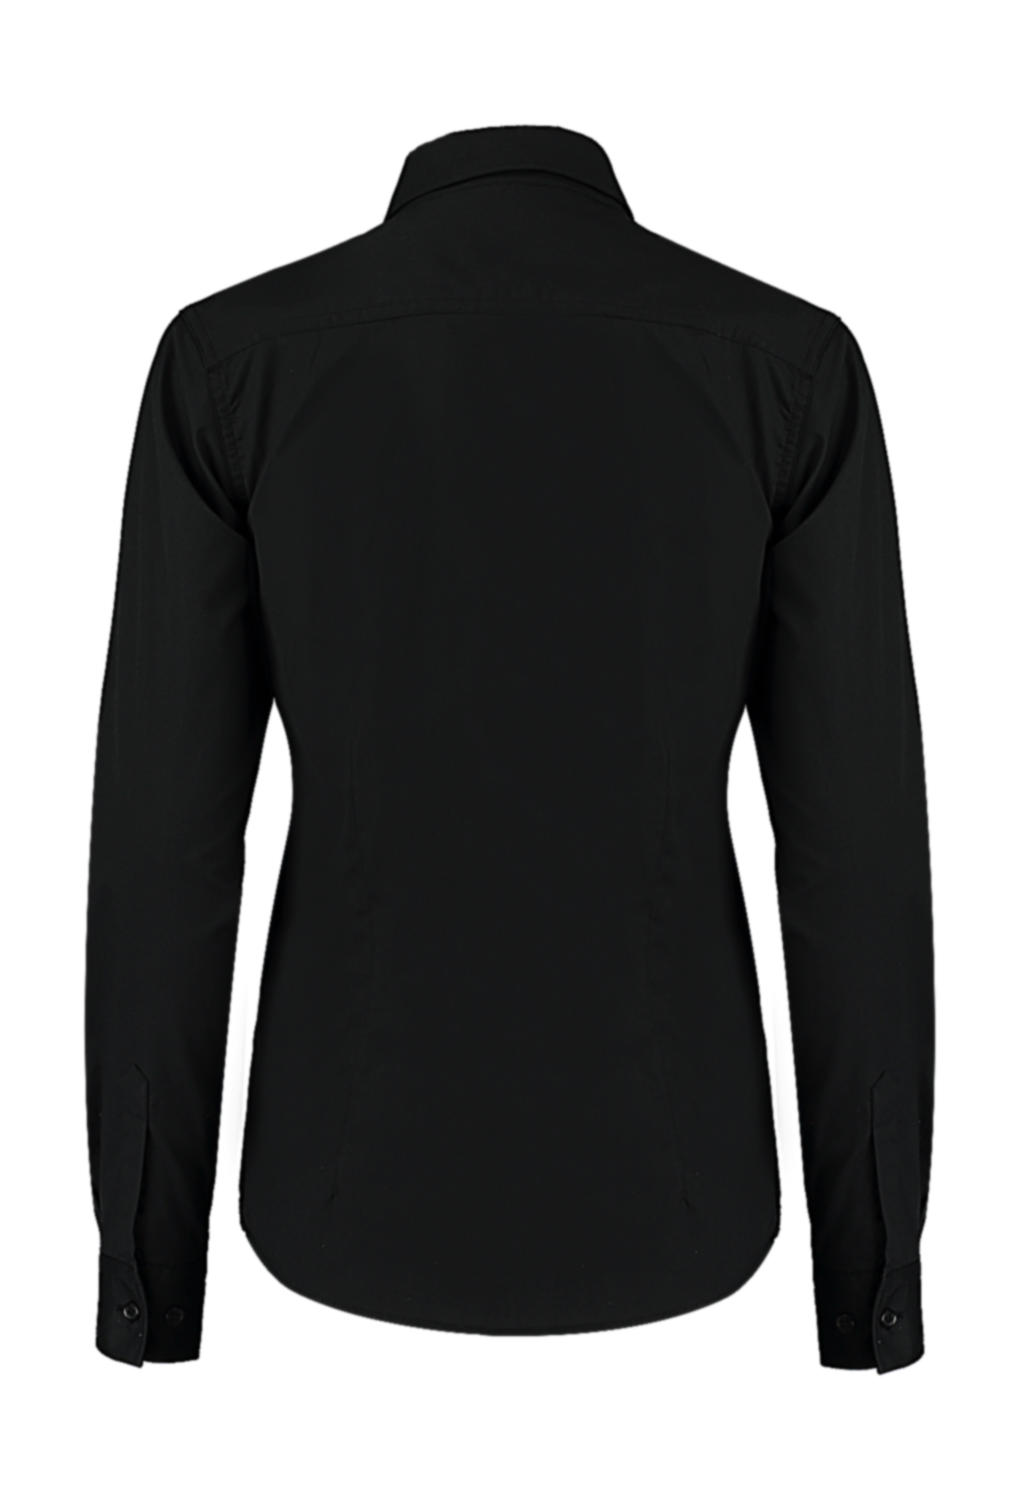  Womens Tailored Fit Shirt in Farbe Black